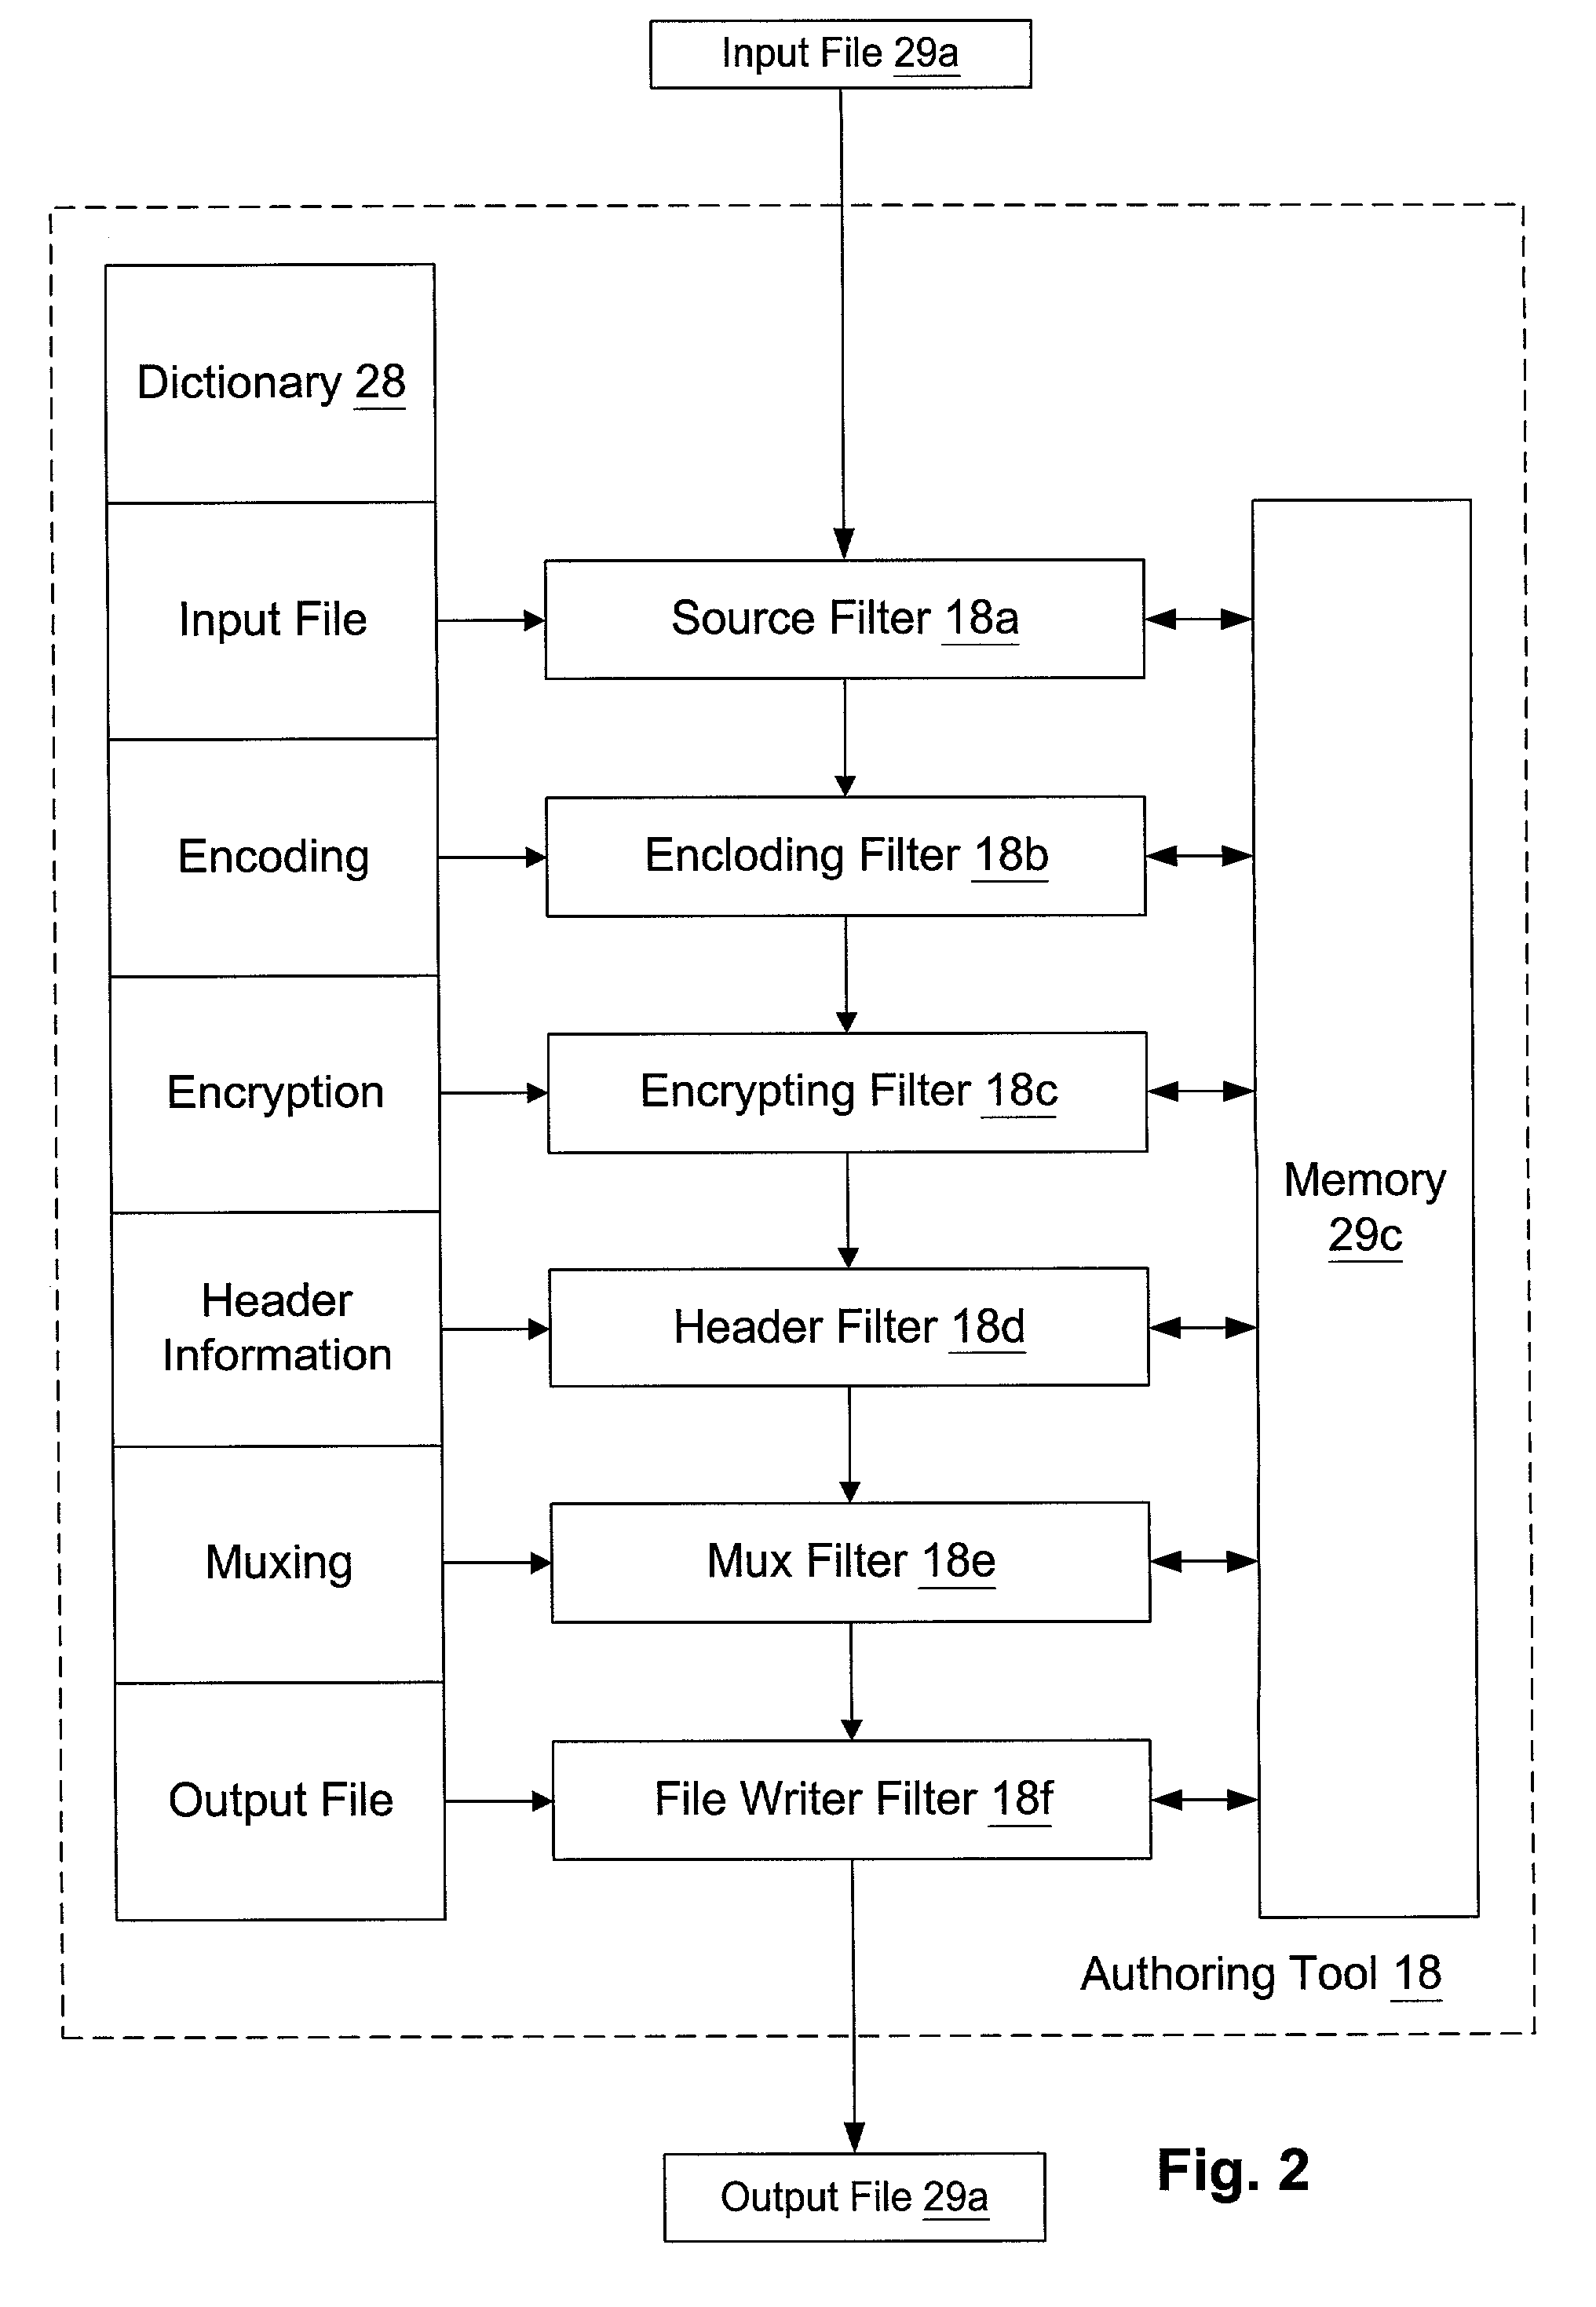 Supervised license acquisition in a digital rights management system on a computing device